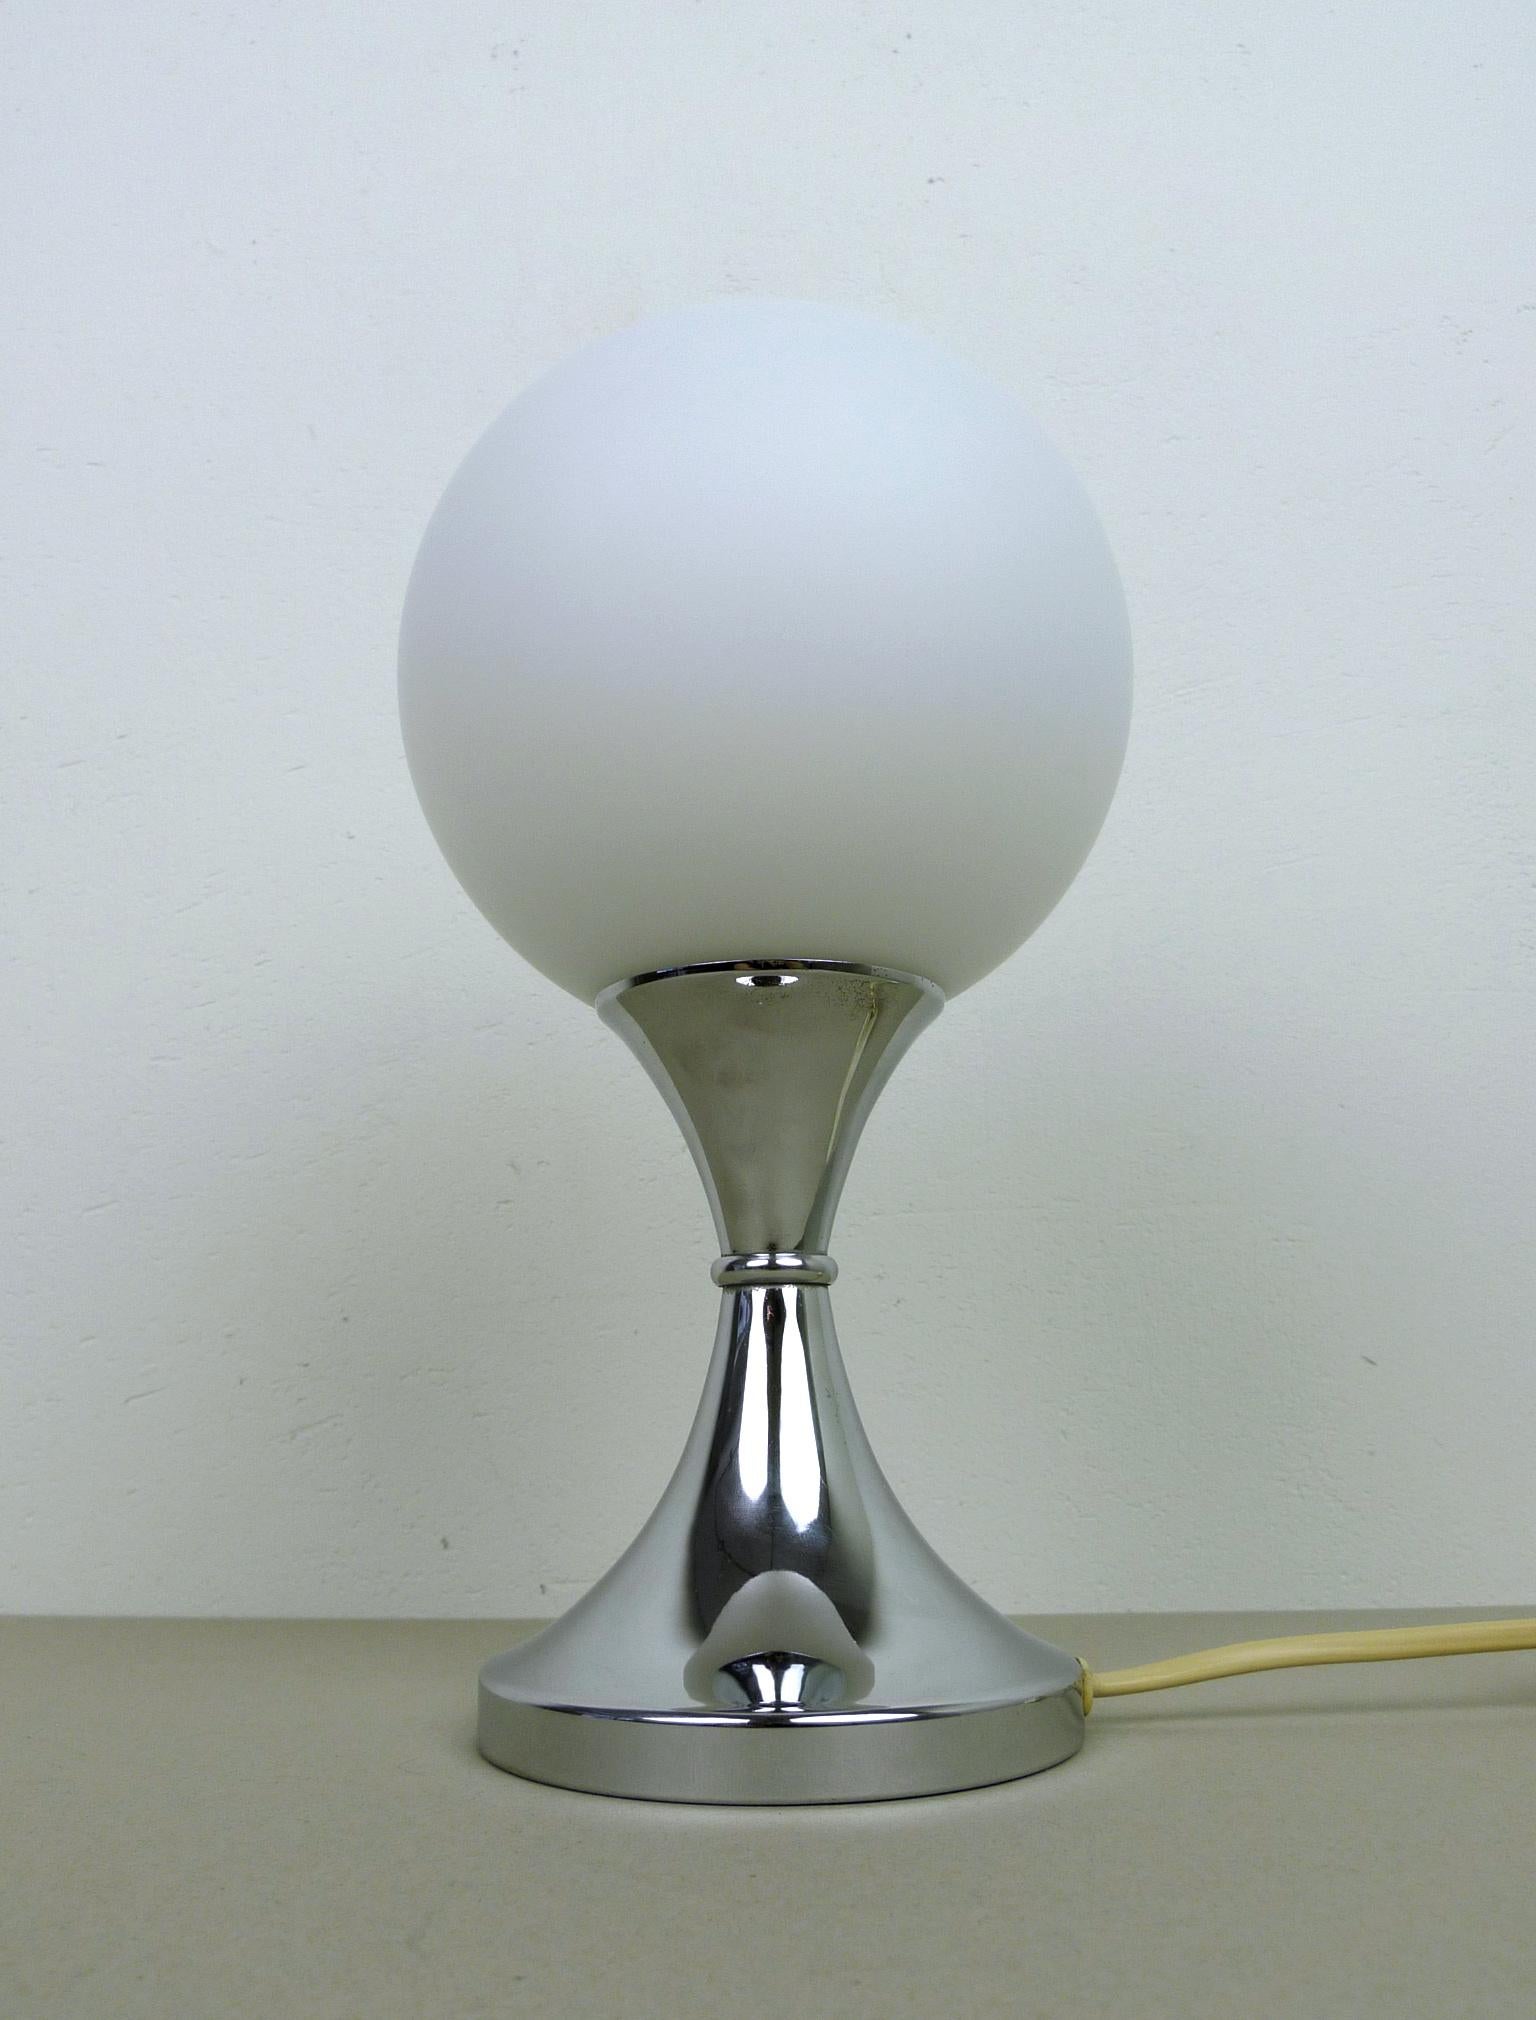 This vintage table lamp features a white opal glass shade and a trumpet-shaped stand in chromed metal. Inside there is an E 14 bulb socket. 
The lamp was produced in Germany in the 1960s and it is in good condition.